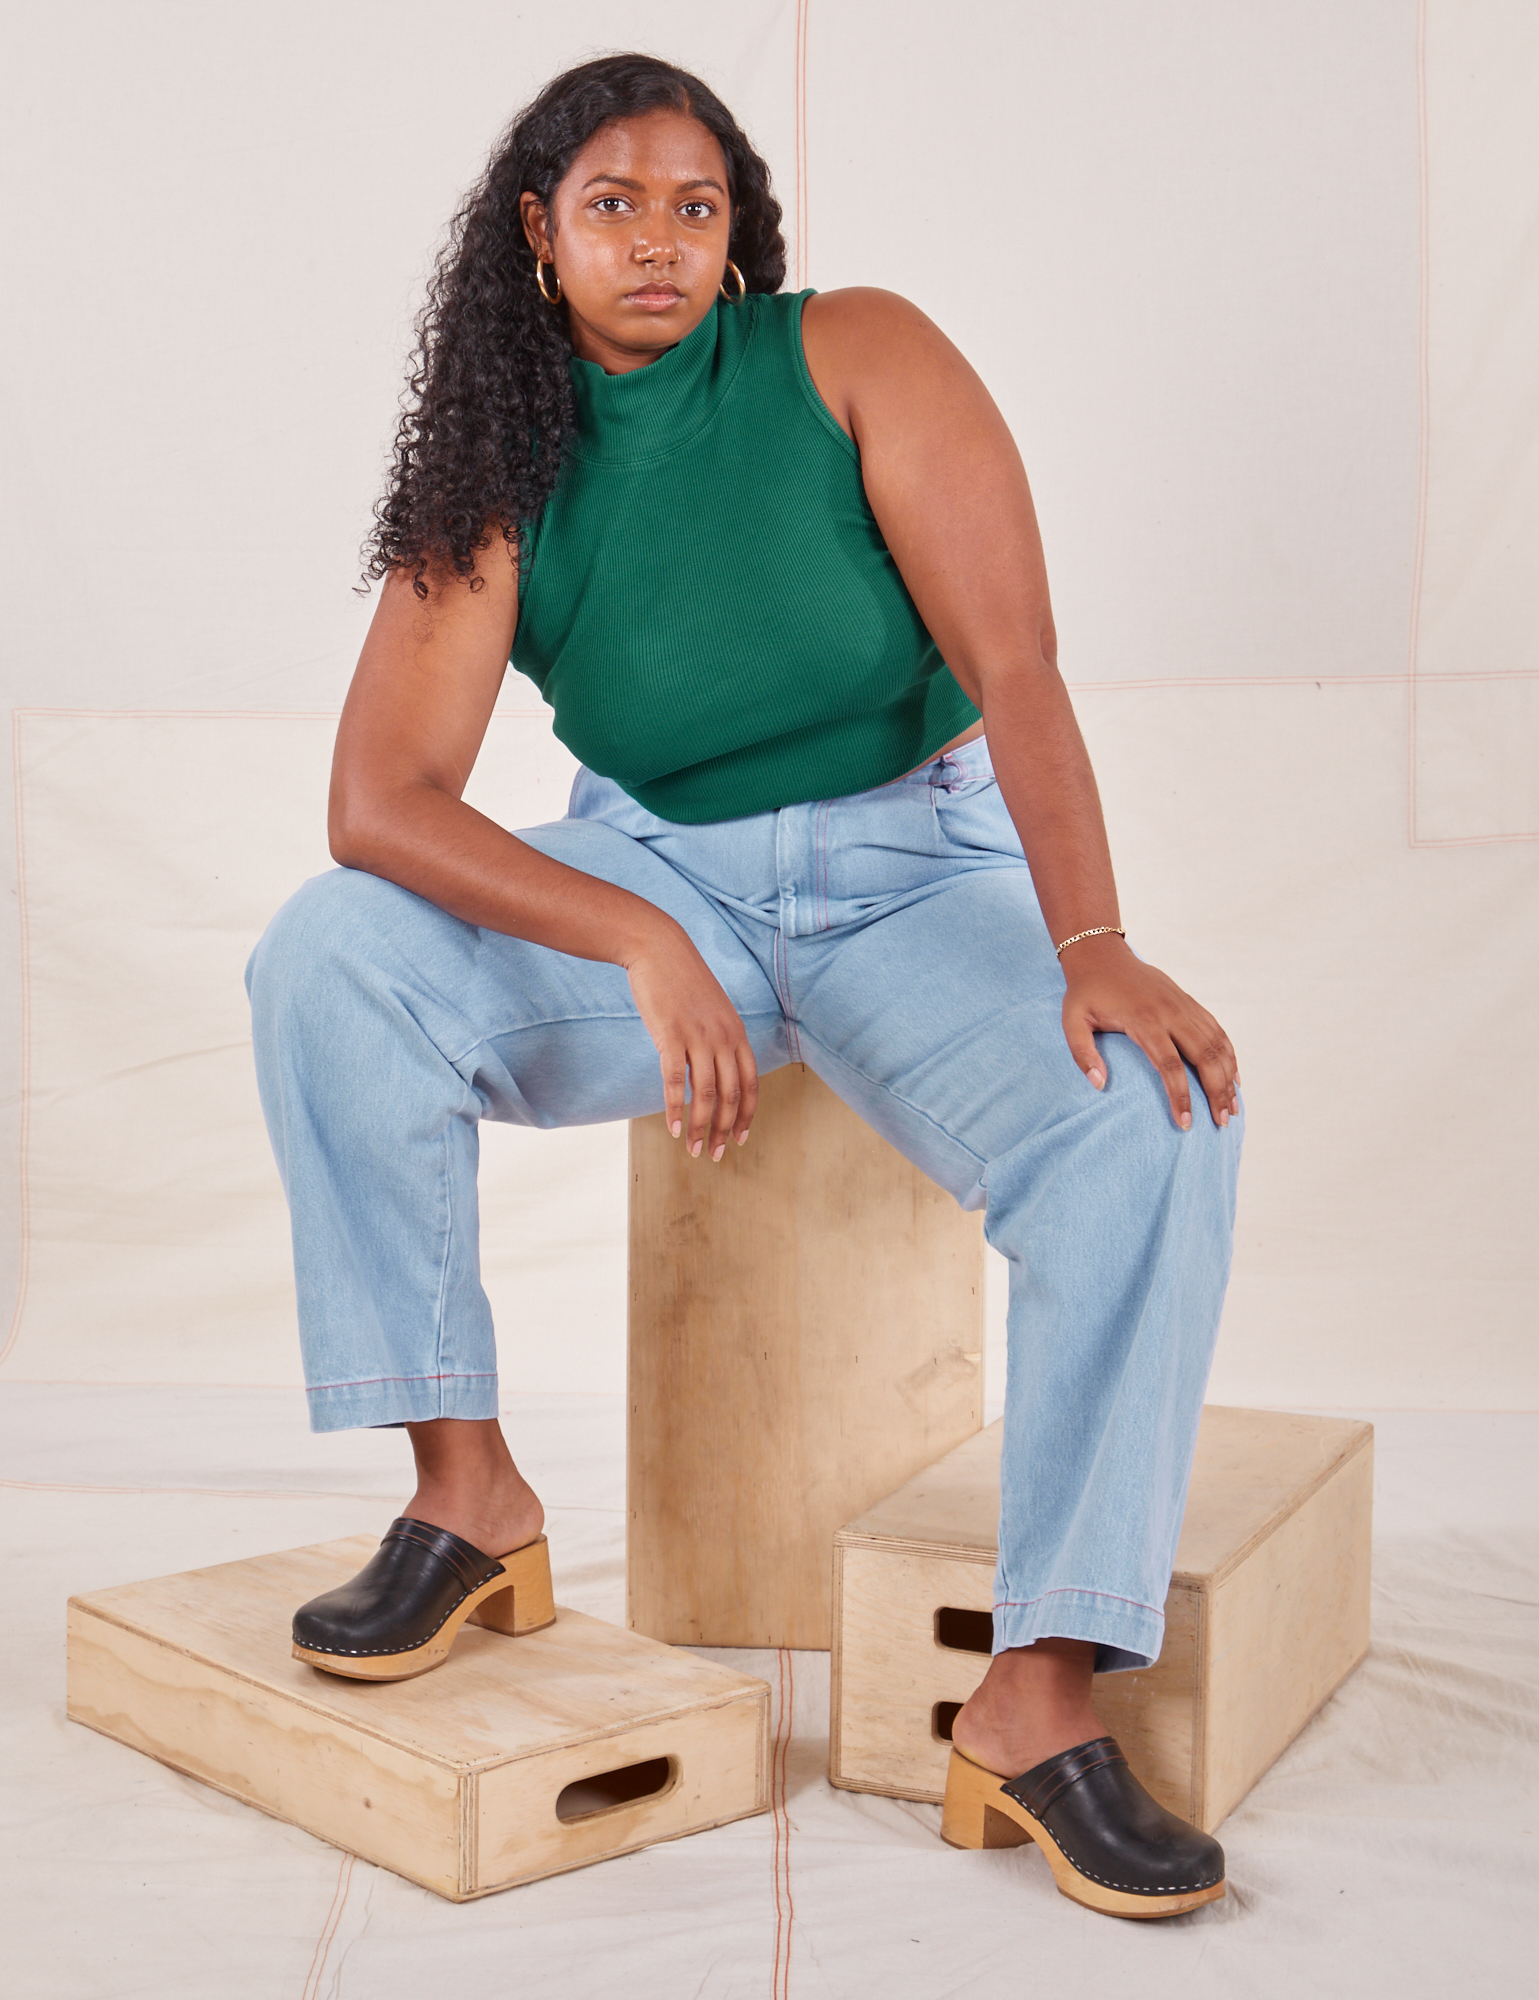 Meghna is wearing Sleeveless Essential Turtleneck in Hunter Green and light wash Denim Trousers